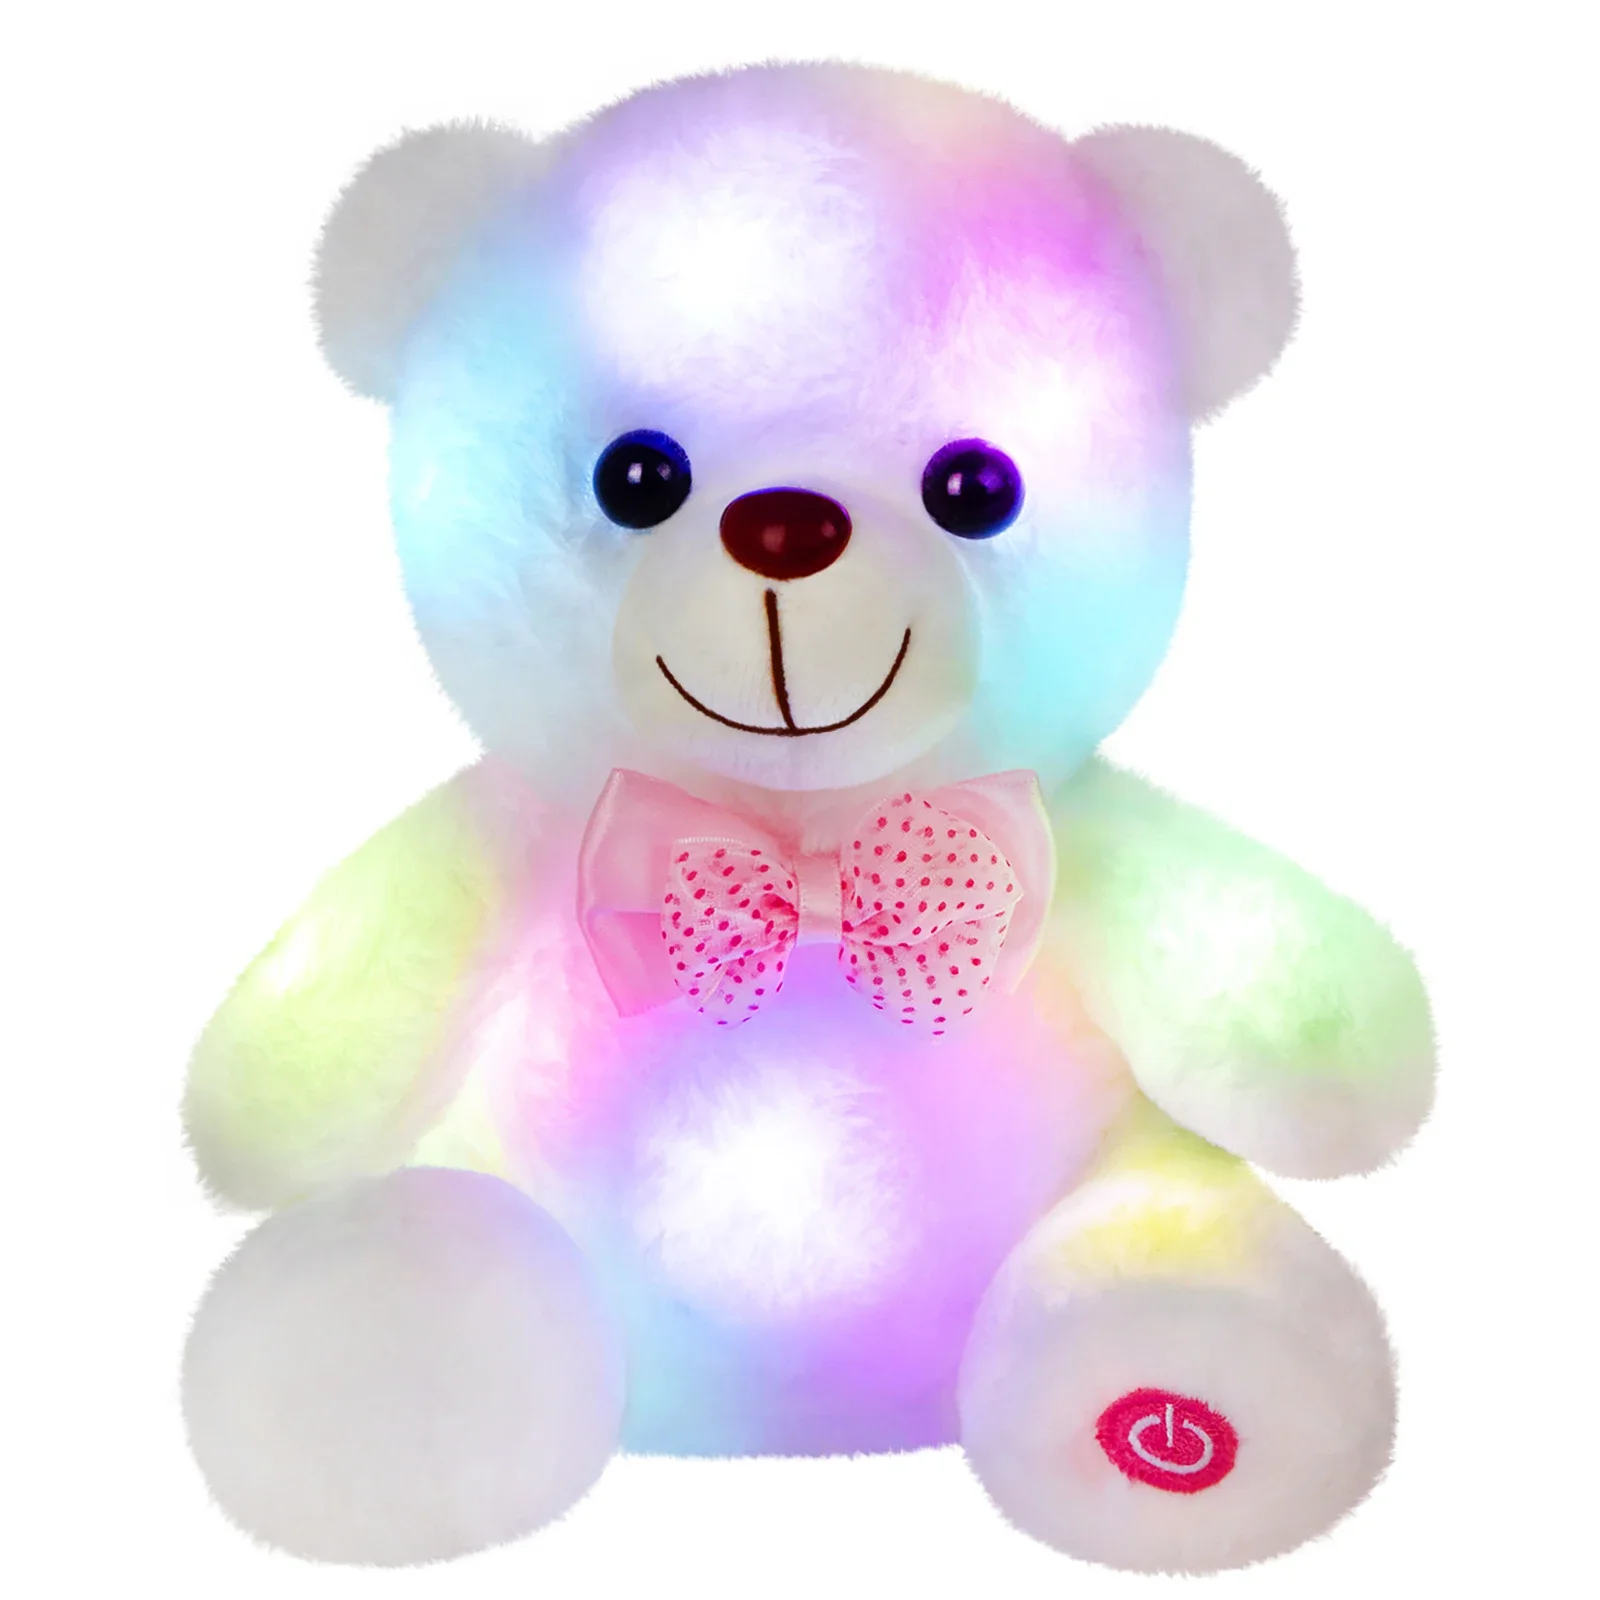 White Bear LED Light Plush Animals Easy to Clean High Quality 20cm Kawaii Doll Stuffed Toys for Girls Bed Sleeping Throw Pillows mini pressure nano spray face steamer red light therapy oxygen injection nail art tattoo makeup nano mist sprayer facial clean